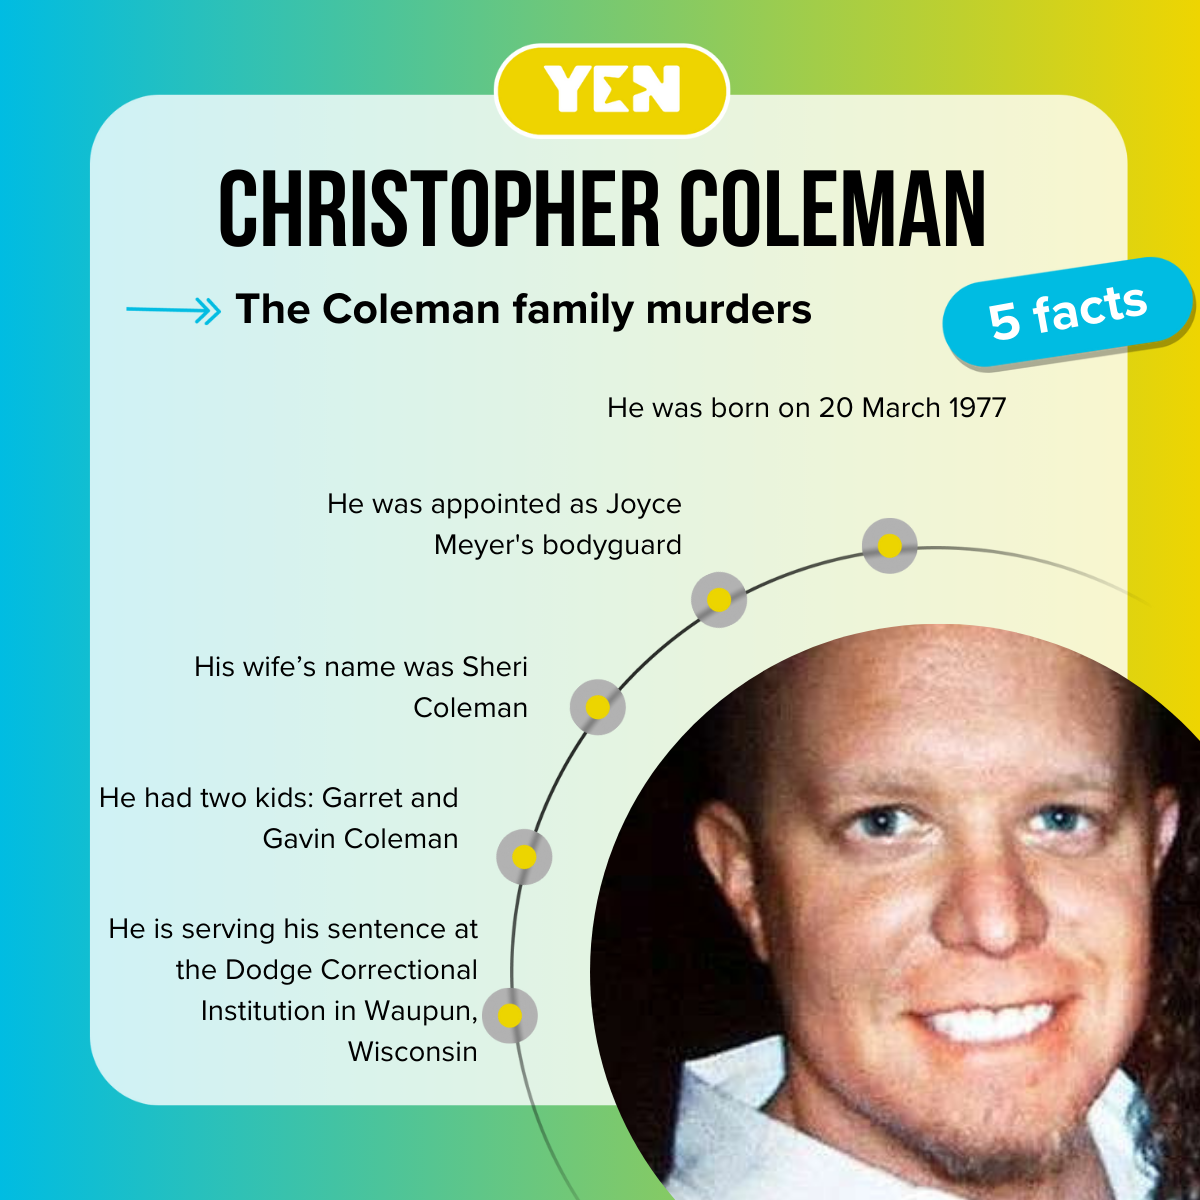 Top 5 facts about Christopher Coleman